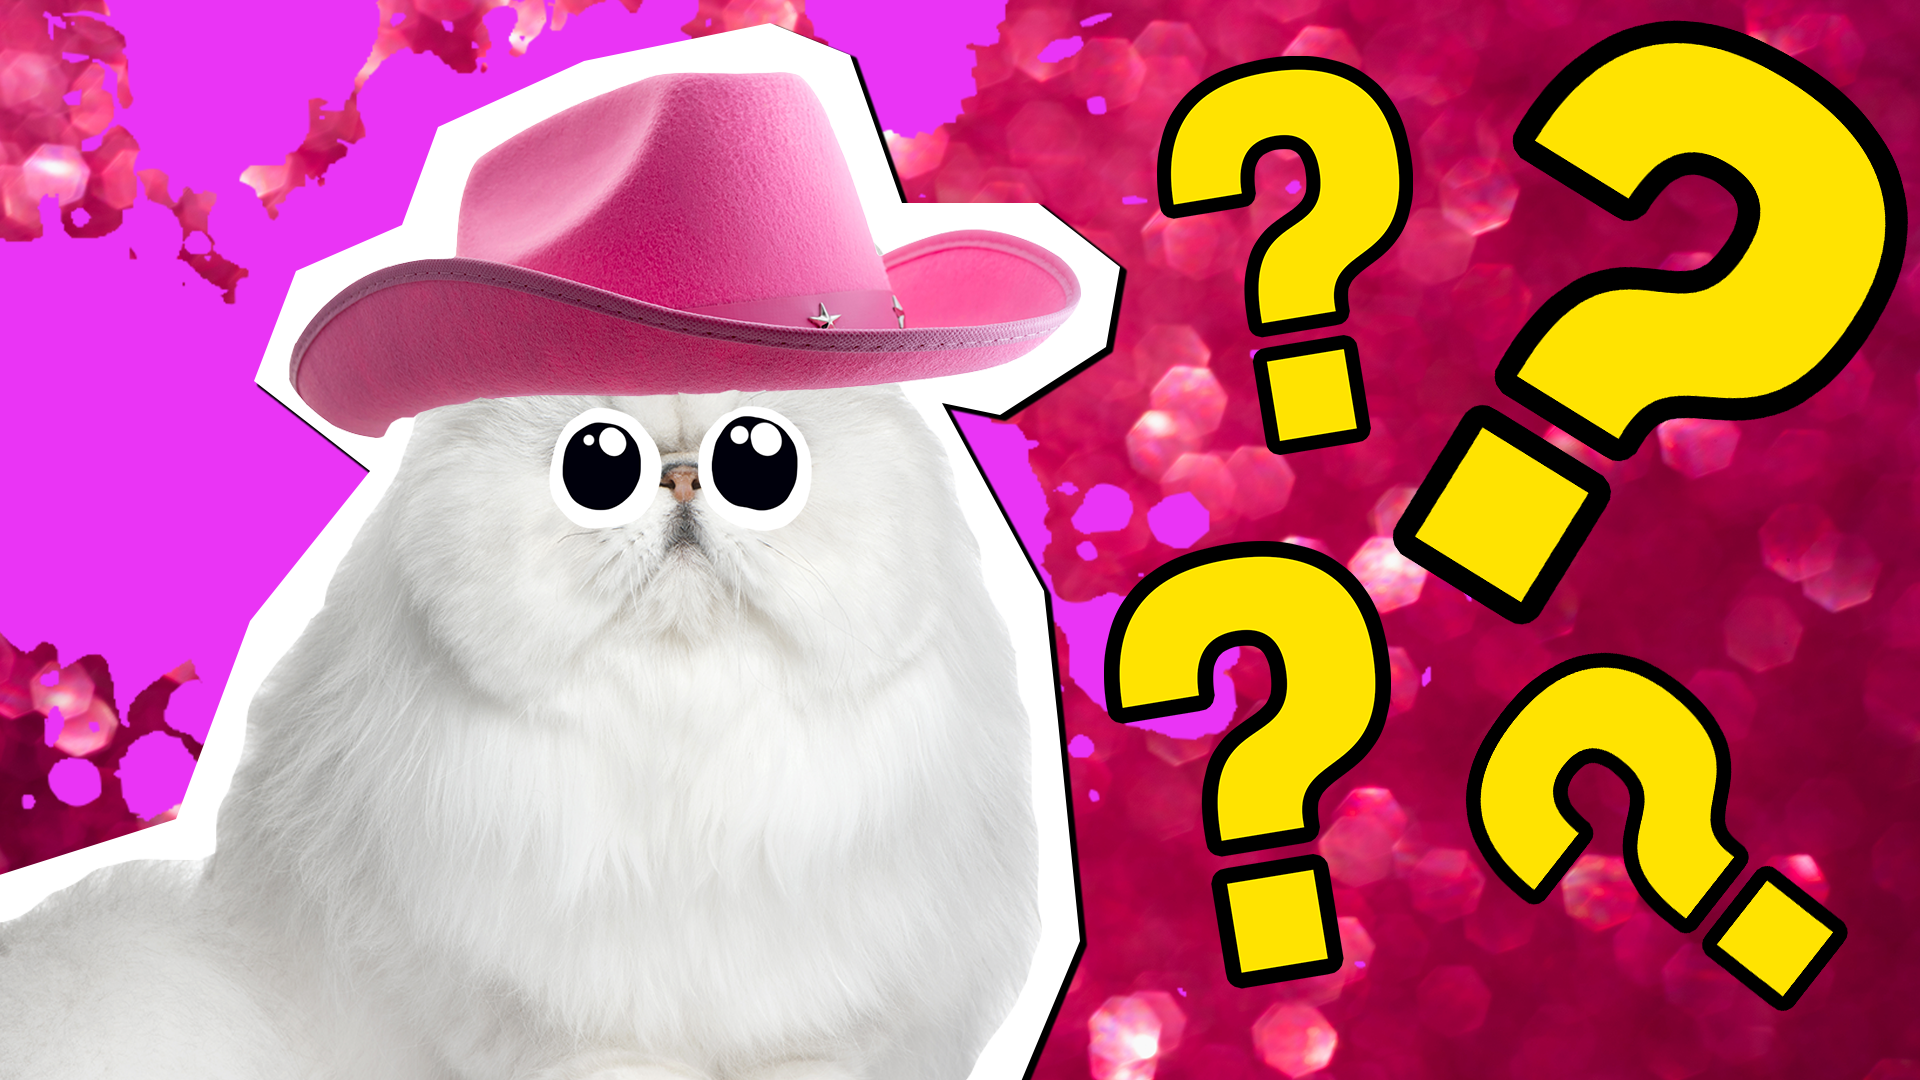 Barbie Pets and Accessories Quiz: Test Your Know-How!